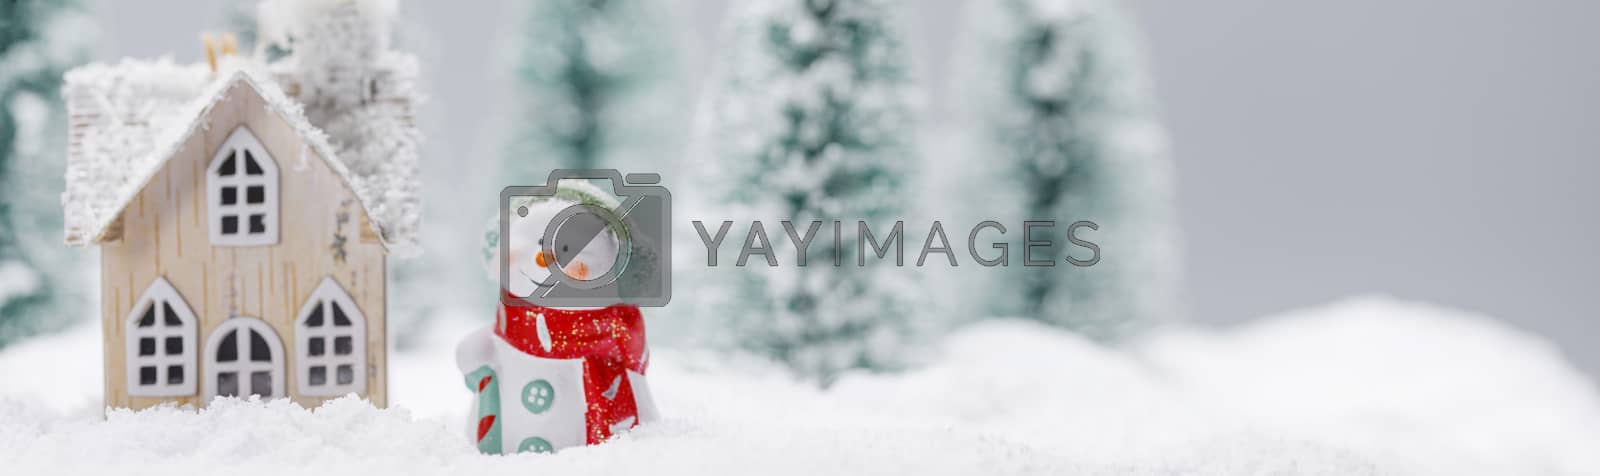 Royalty free image of Snowman and house in winter by Yellowj